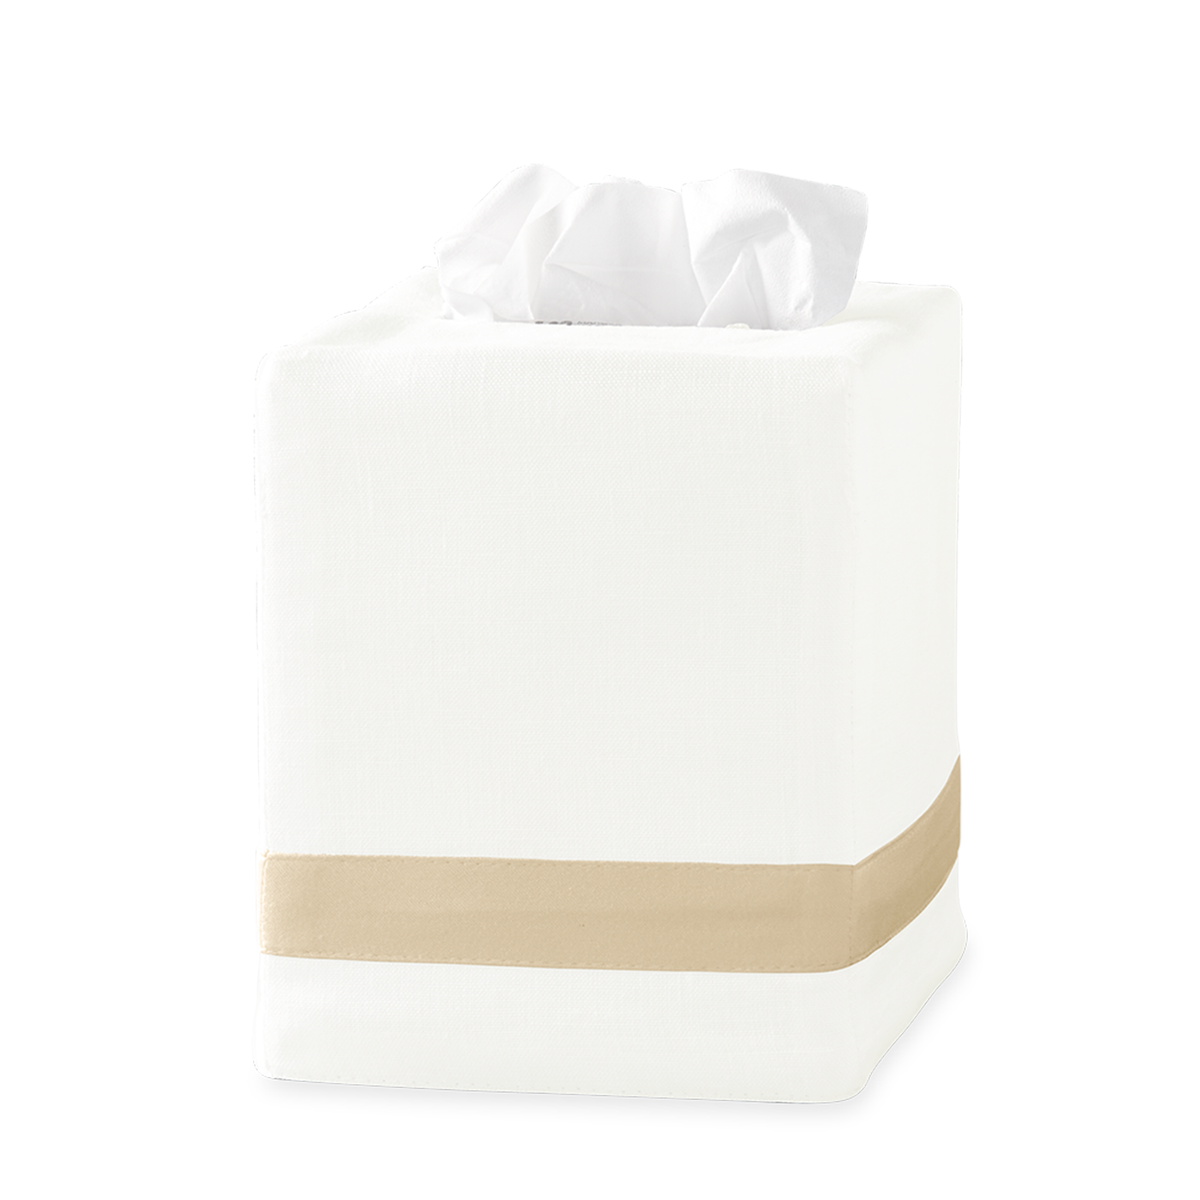 Silo Image of Matouk Lowell Tissue Box Cover in Color Ivory/Champagne